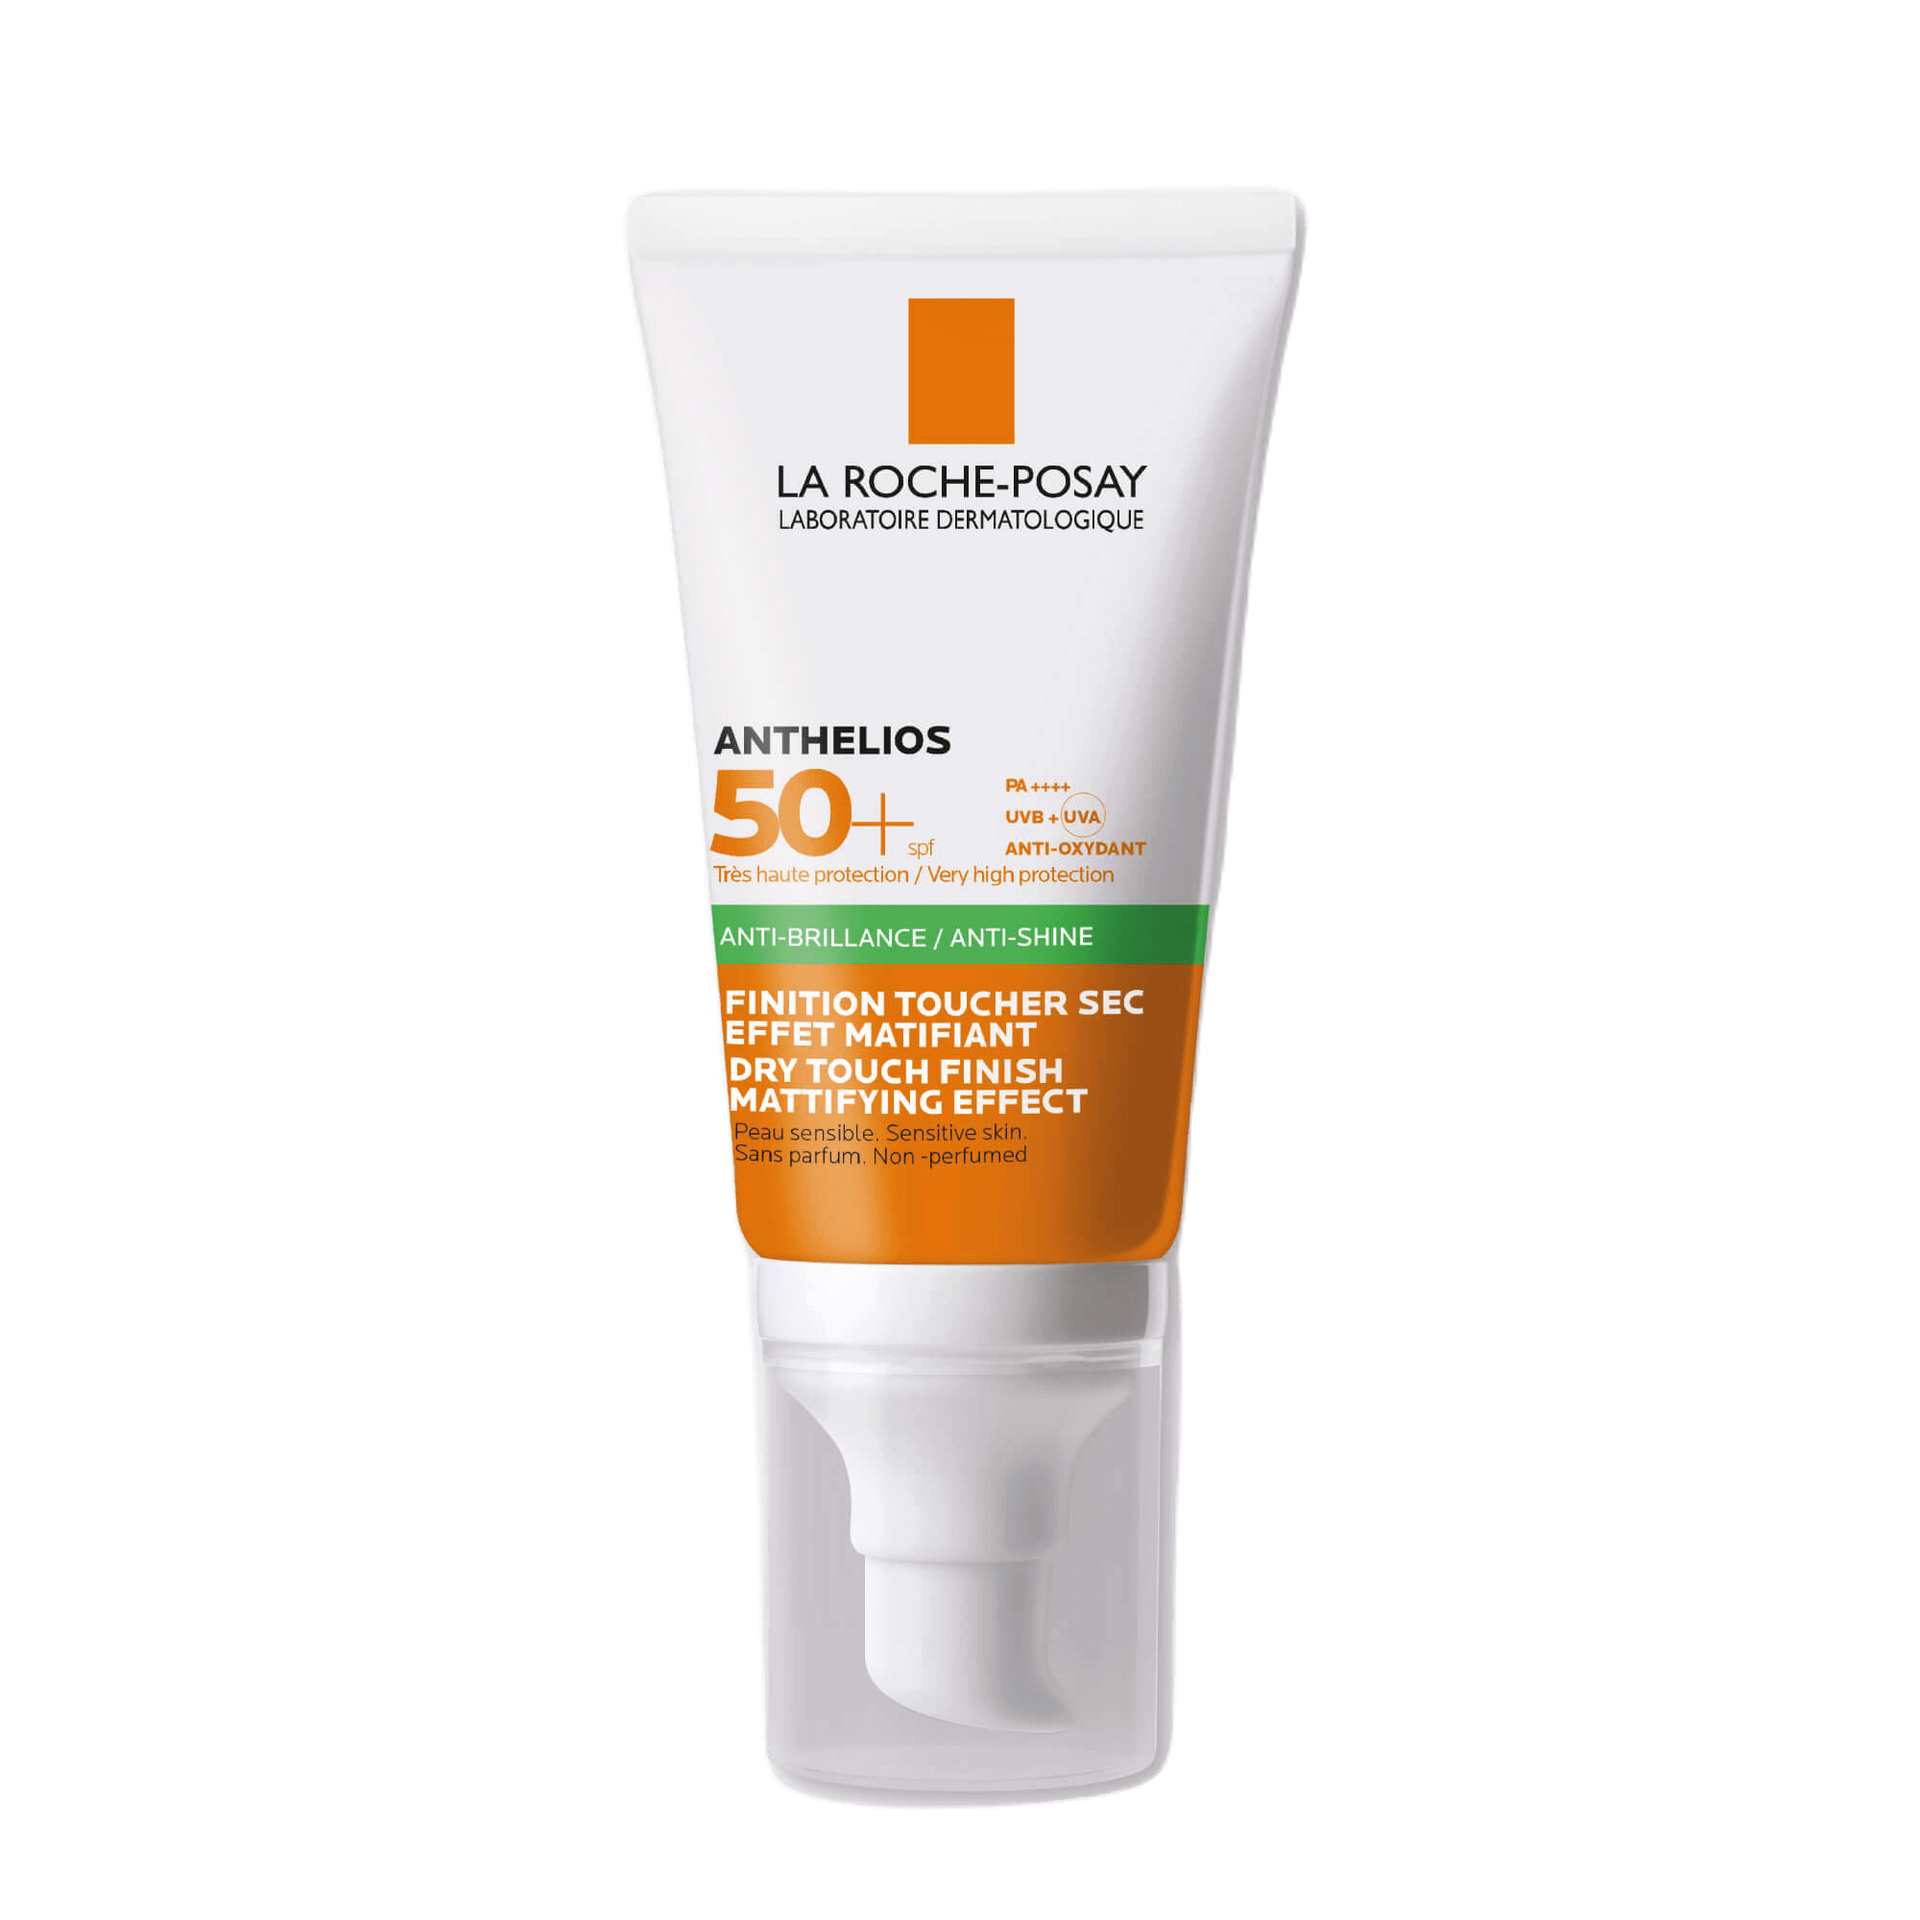 ANTHELIOS XL DRY TOUCH GEL-CREAM SPF50+ NON-PERFUMED